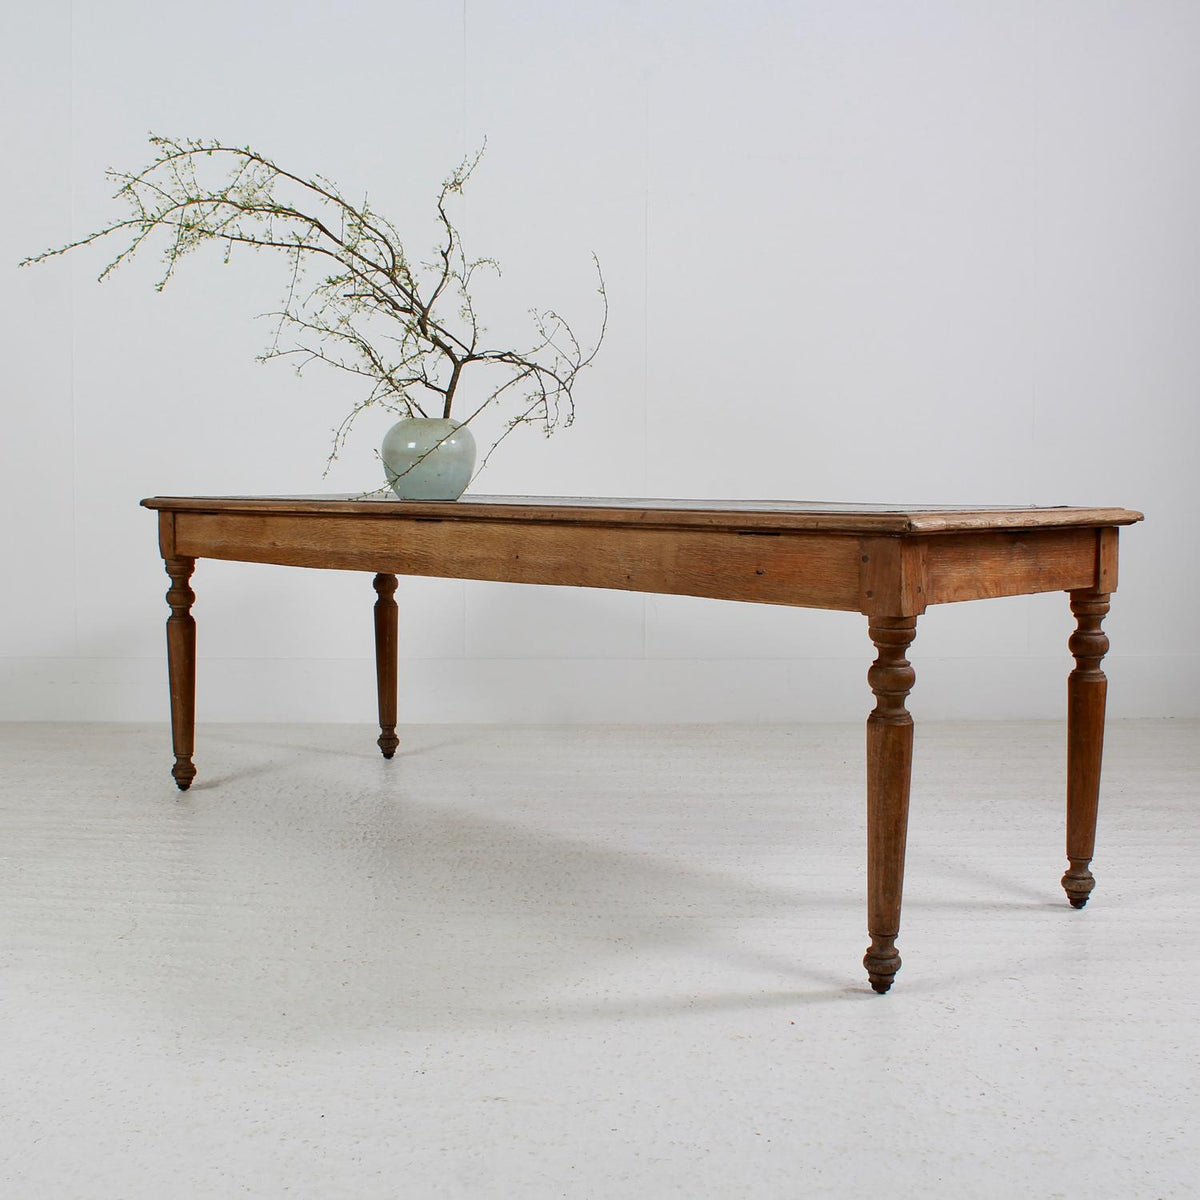 Antique English Oak  19thC Table with Zinc Top